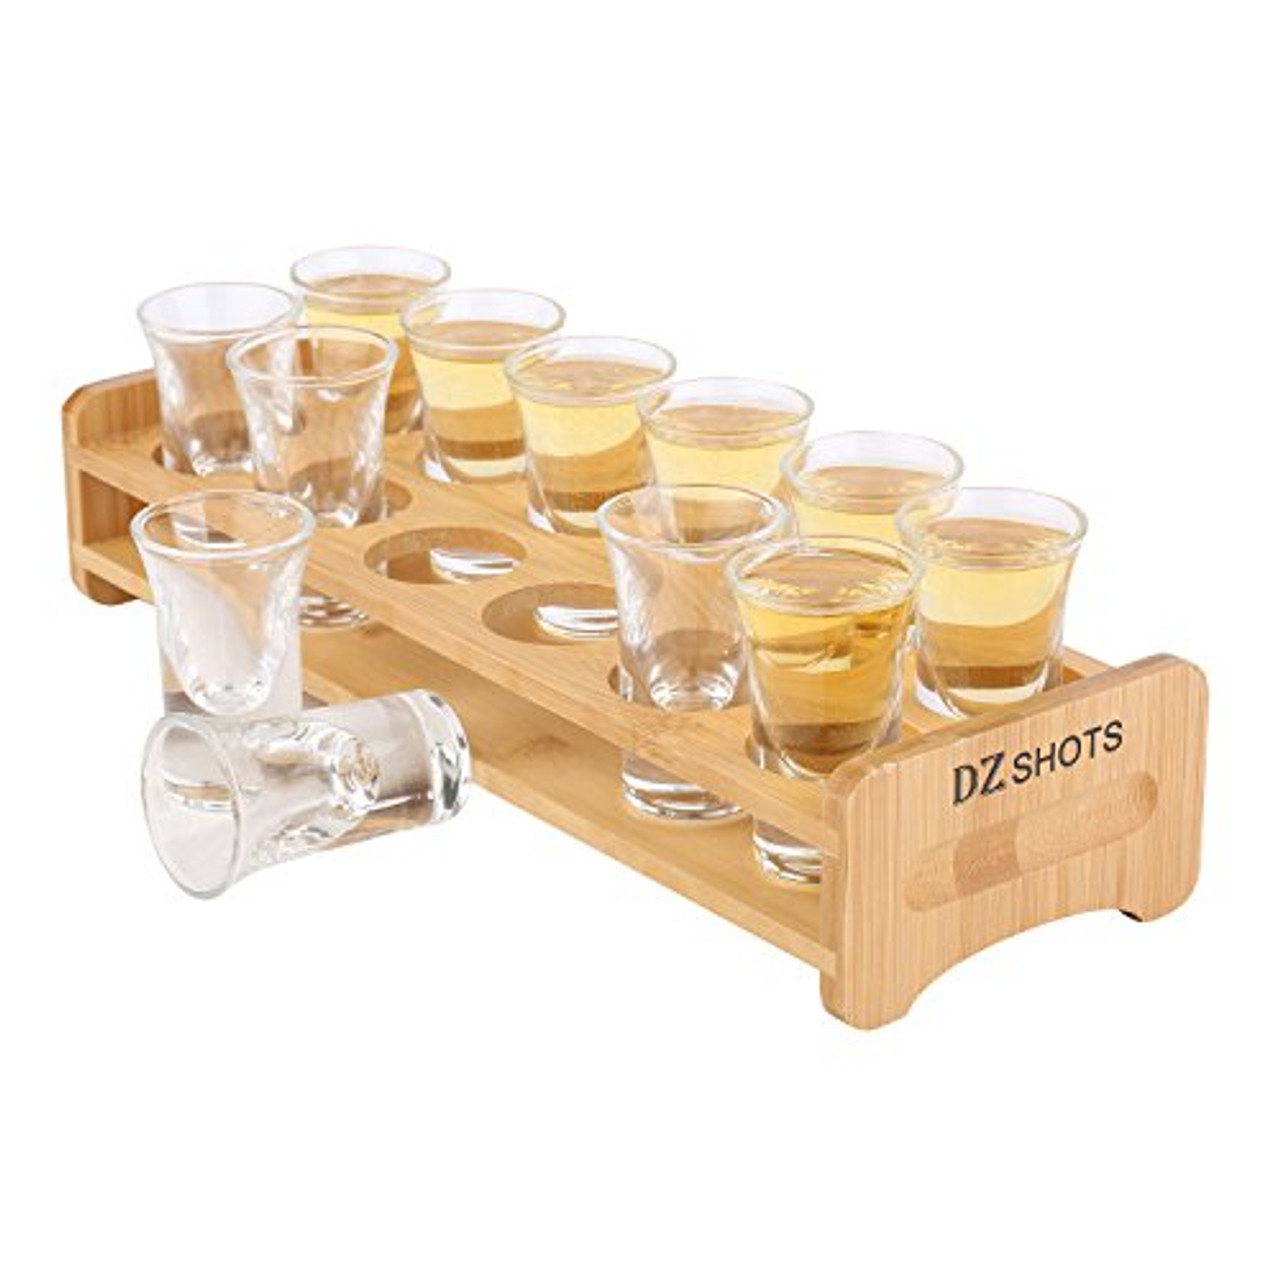 DZ 12 Pcs Shot Glass Set with Tray,Thick Base Crystal Clear Shot Glasses  and Bamboo Holder for Barware, Shot Glass Display,Drinking Whisky Brandy  Vodka Rum and Tequila Shot Set,0.75oz